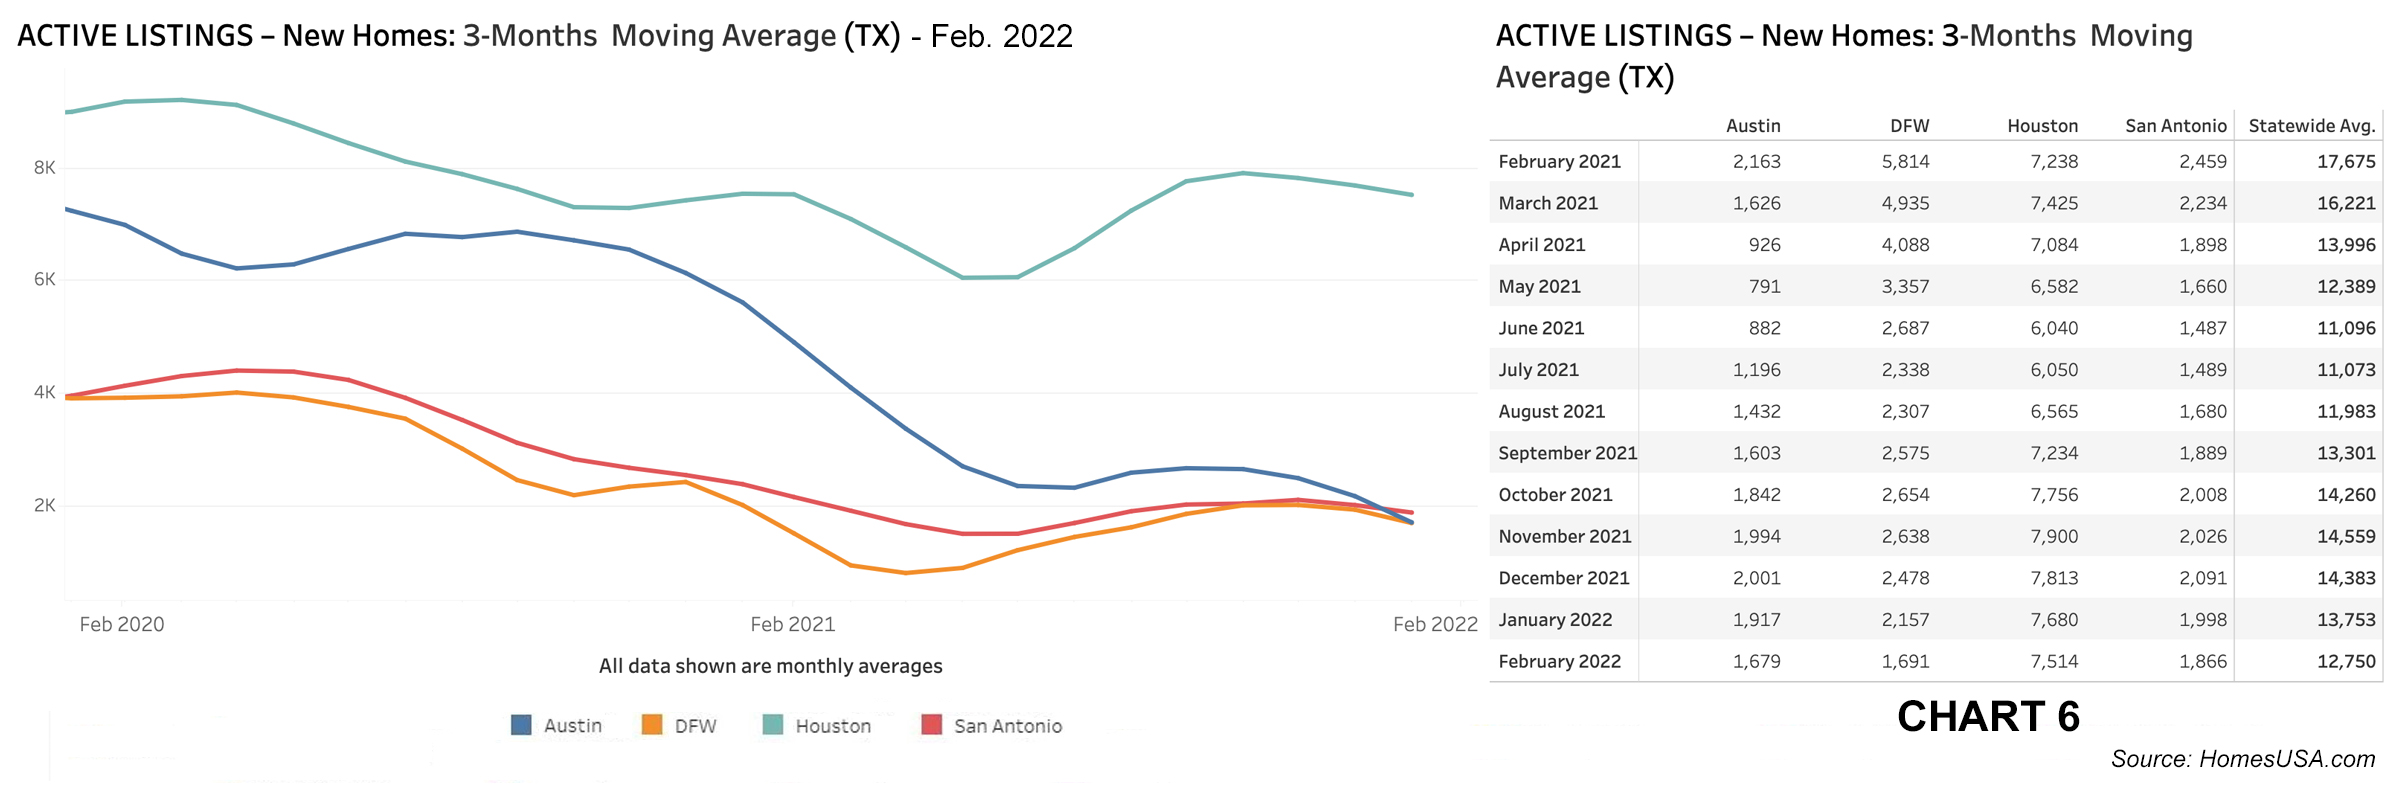 Chart 6: Texas Active Listings for New Homes – February 2022